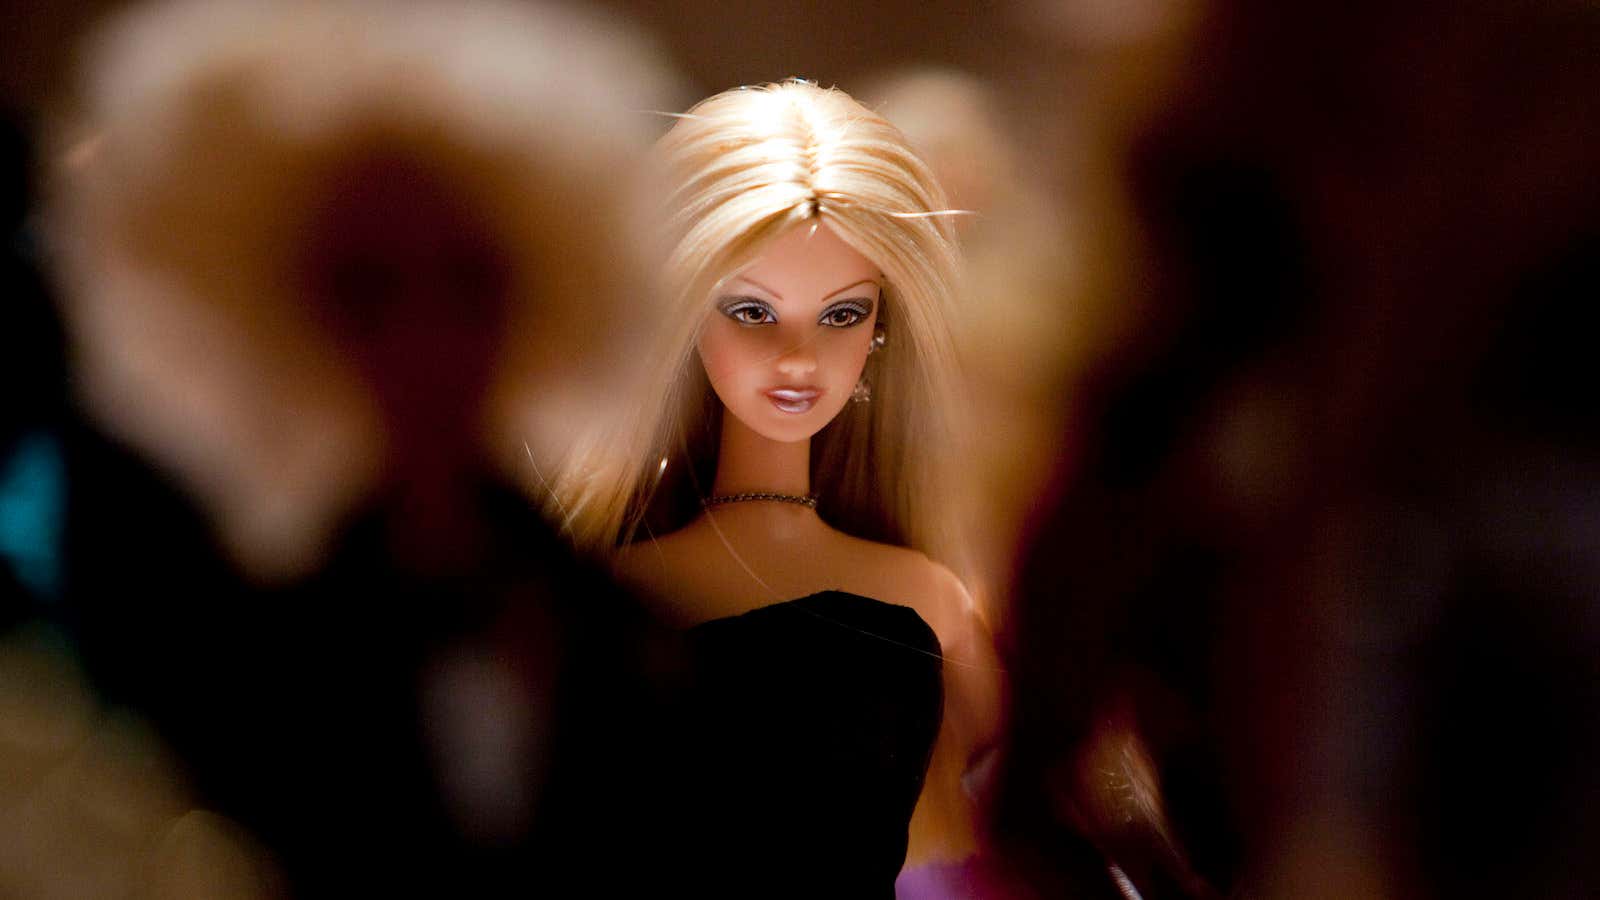 Dark days in the house of Barbie.